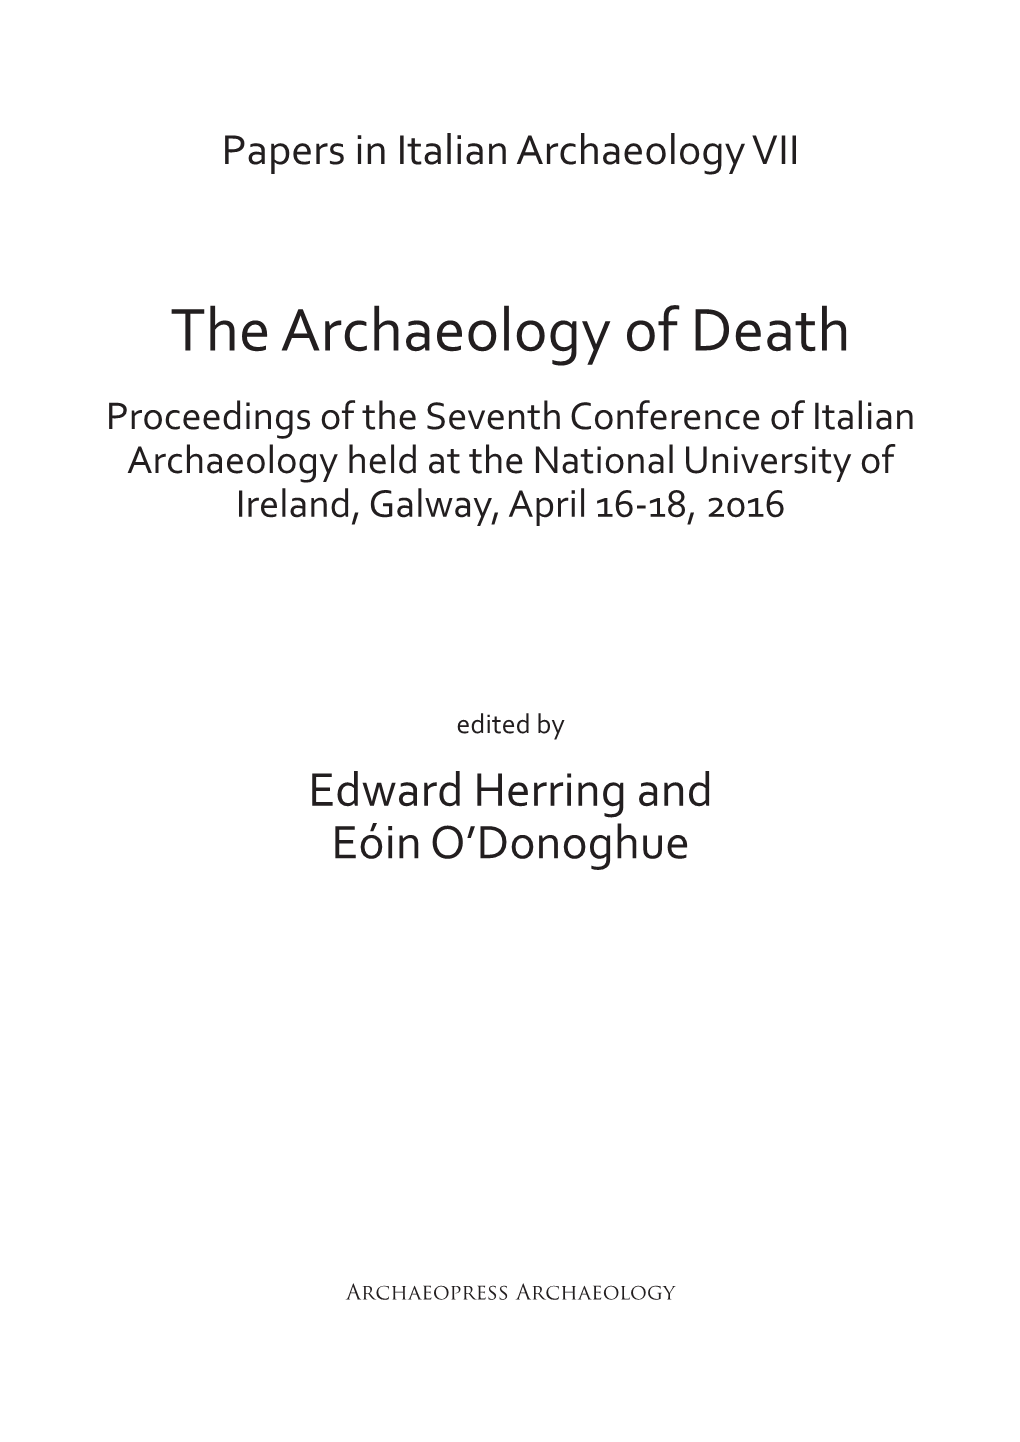 The Archaeology of Death Proceedings of the Seventh Conference of Italian Archaeology Held at the National University of Ireland, Galway, April 16-18, 2016